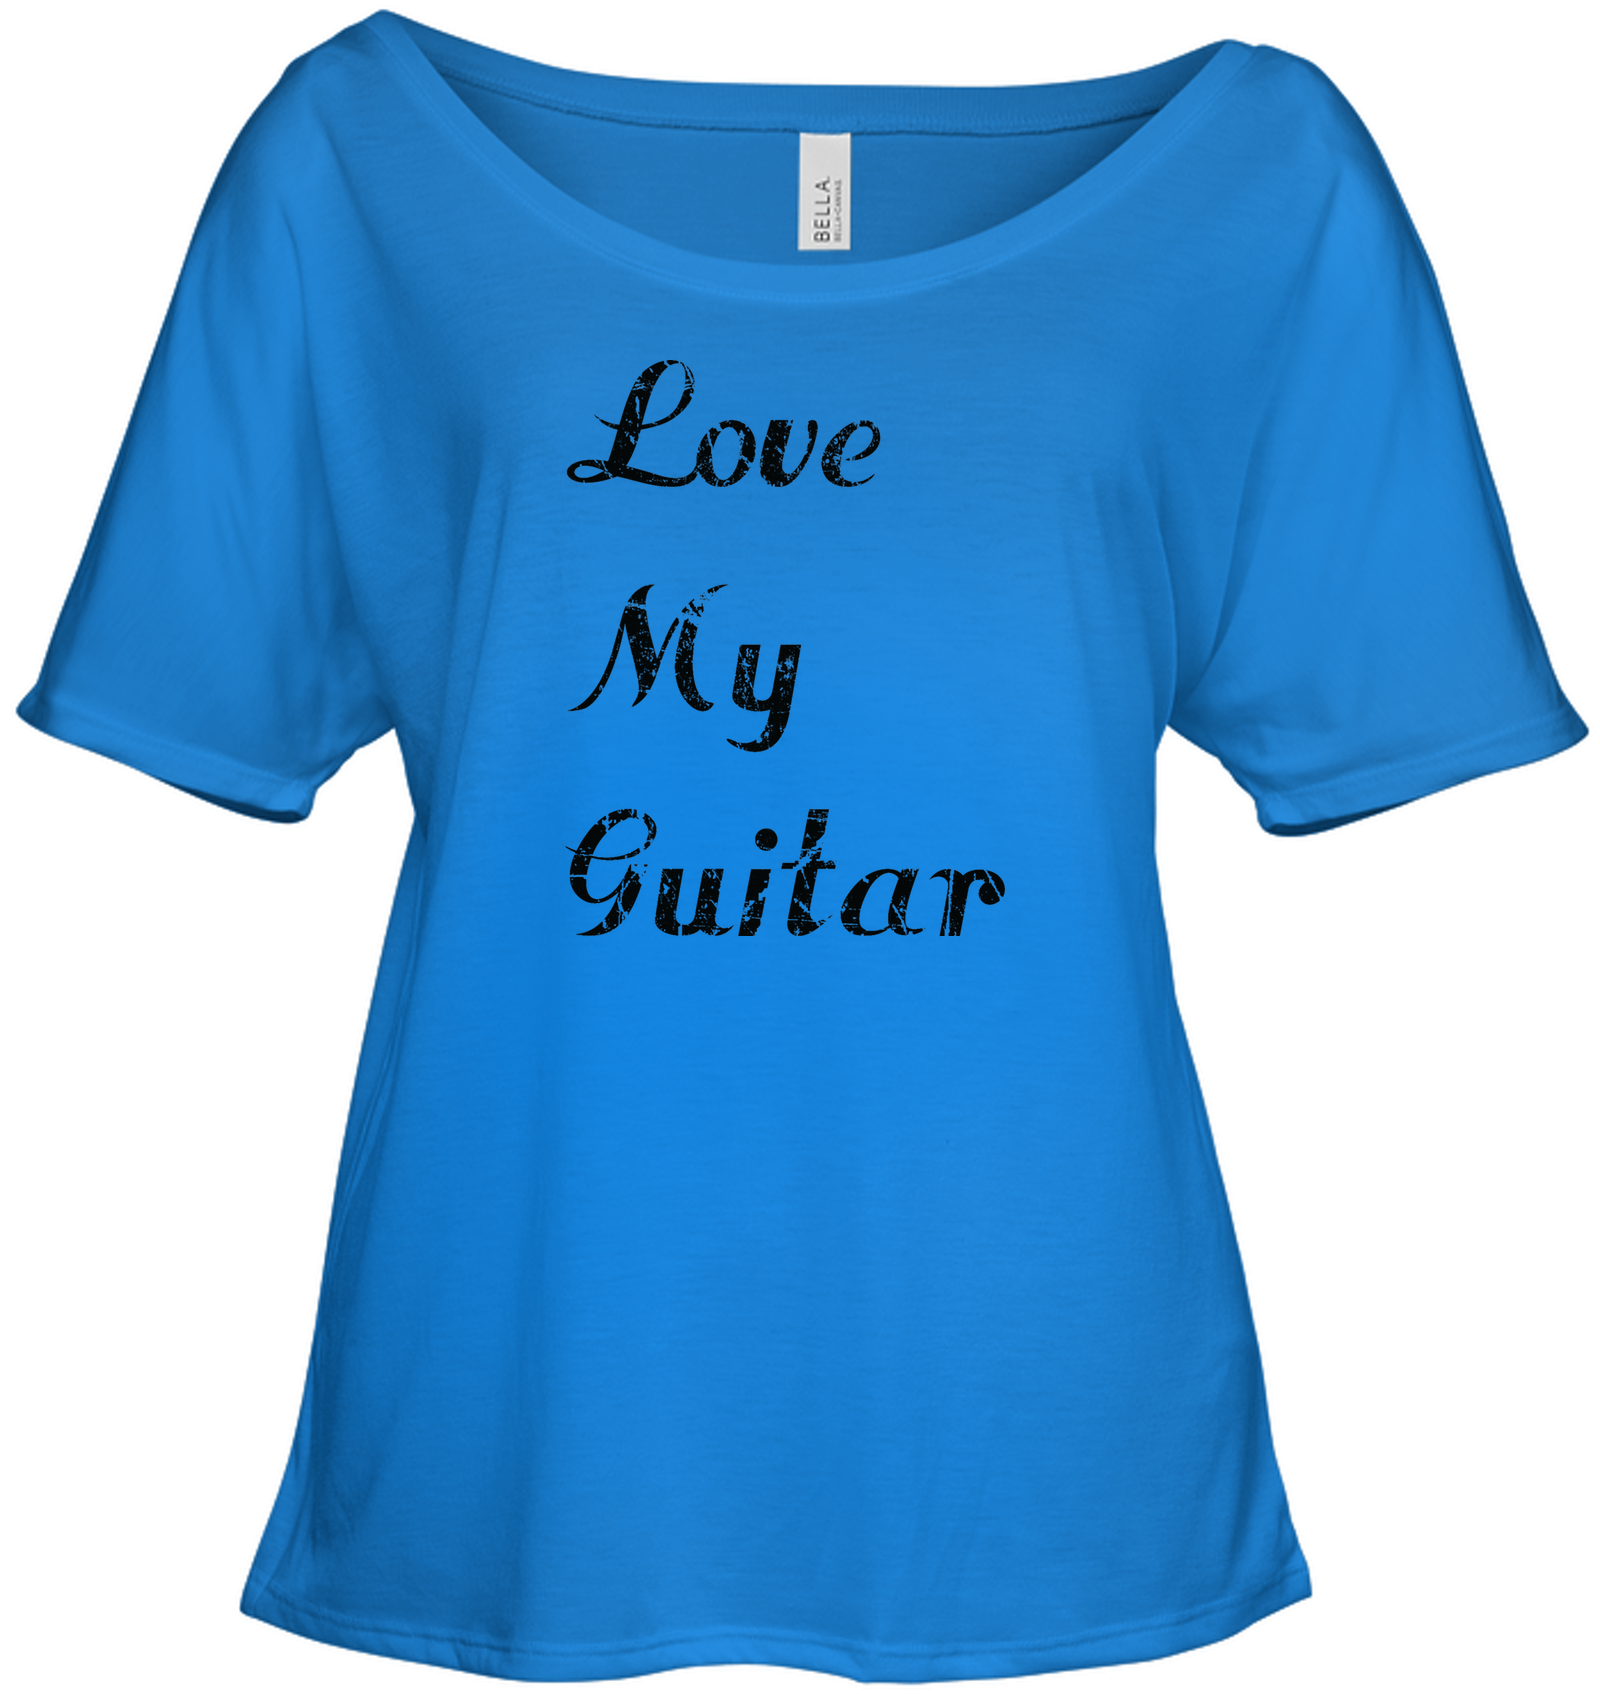 Love My Guitar simple and true - Bella + Canvas Women's Slouchy Tee